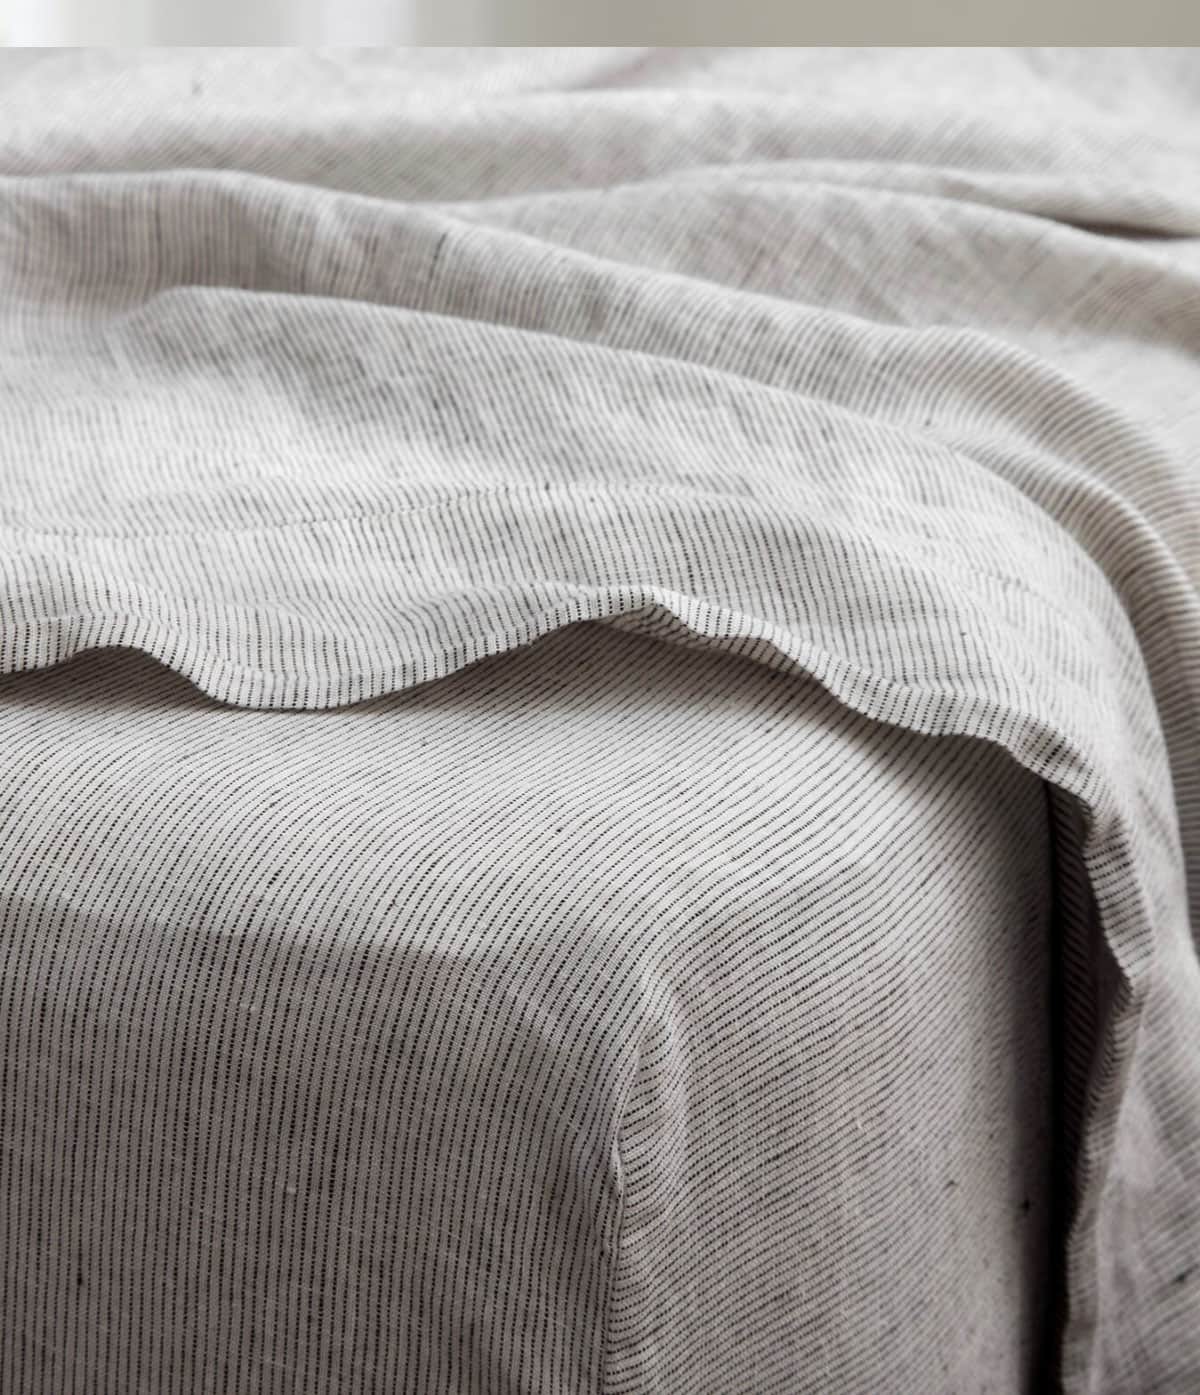 Ultimate Guide To The Best Sheets - Softest Linen Sheets 